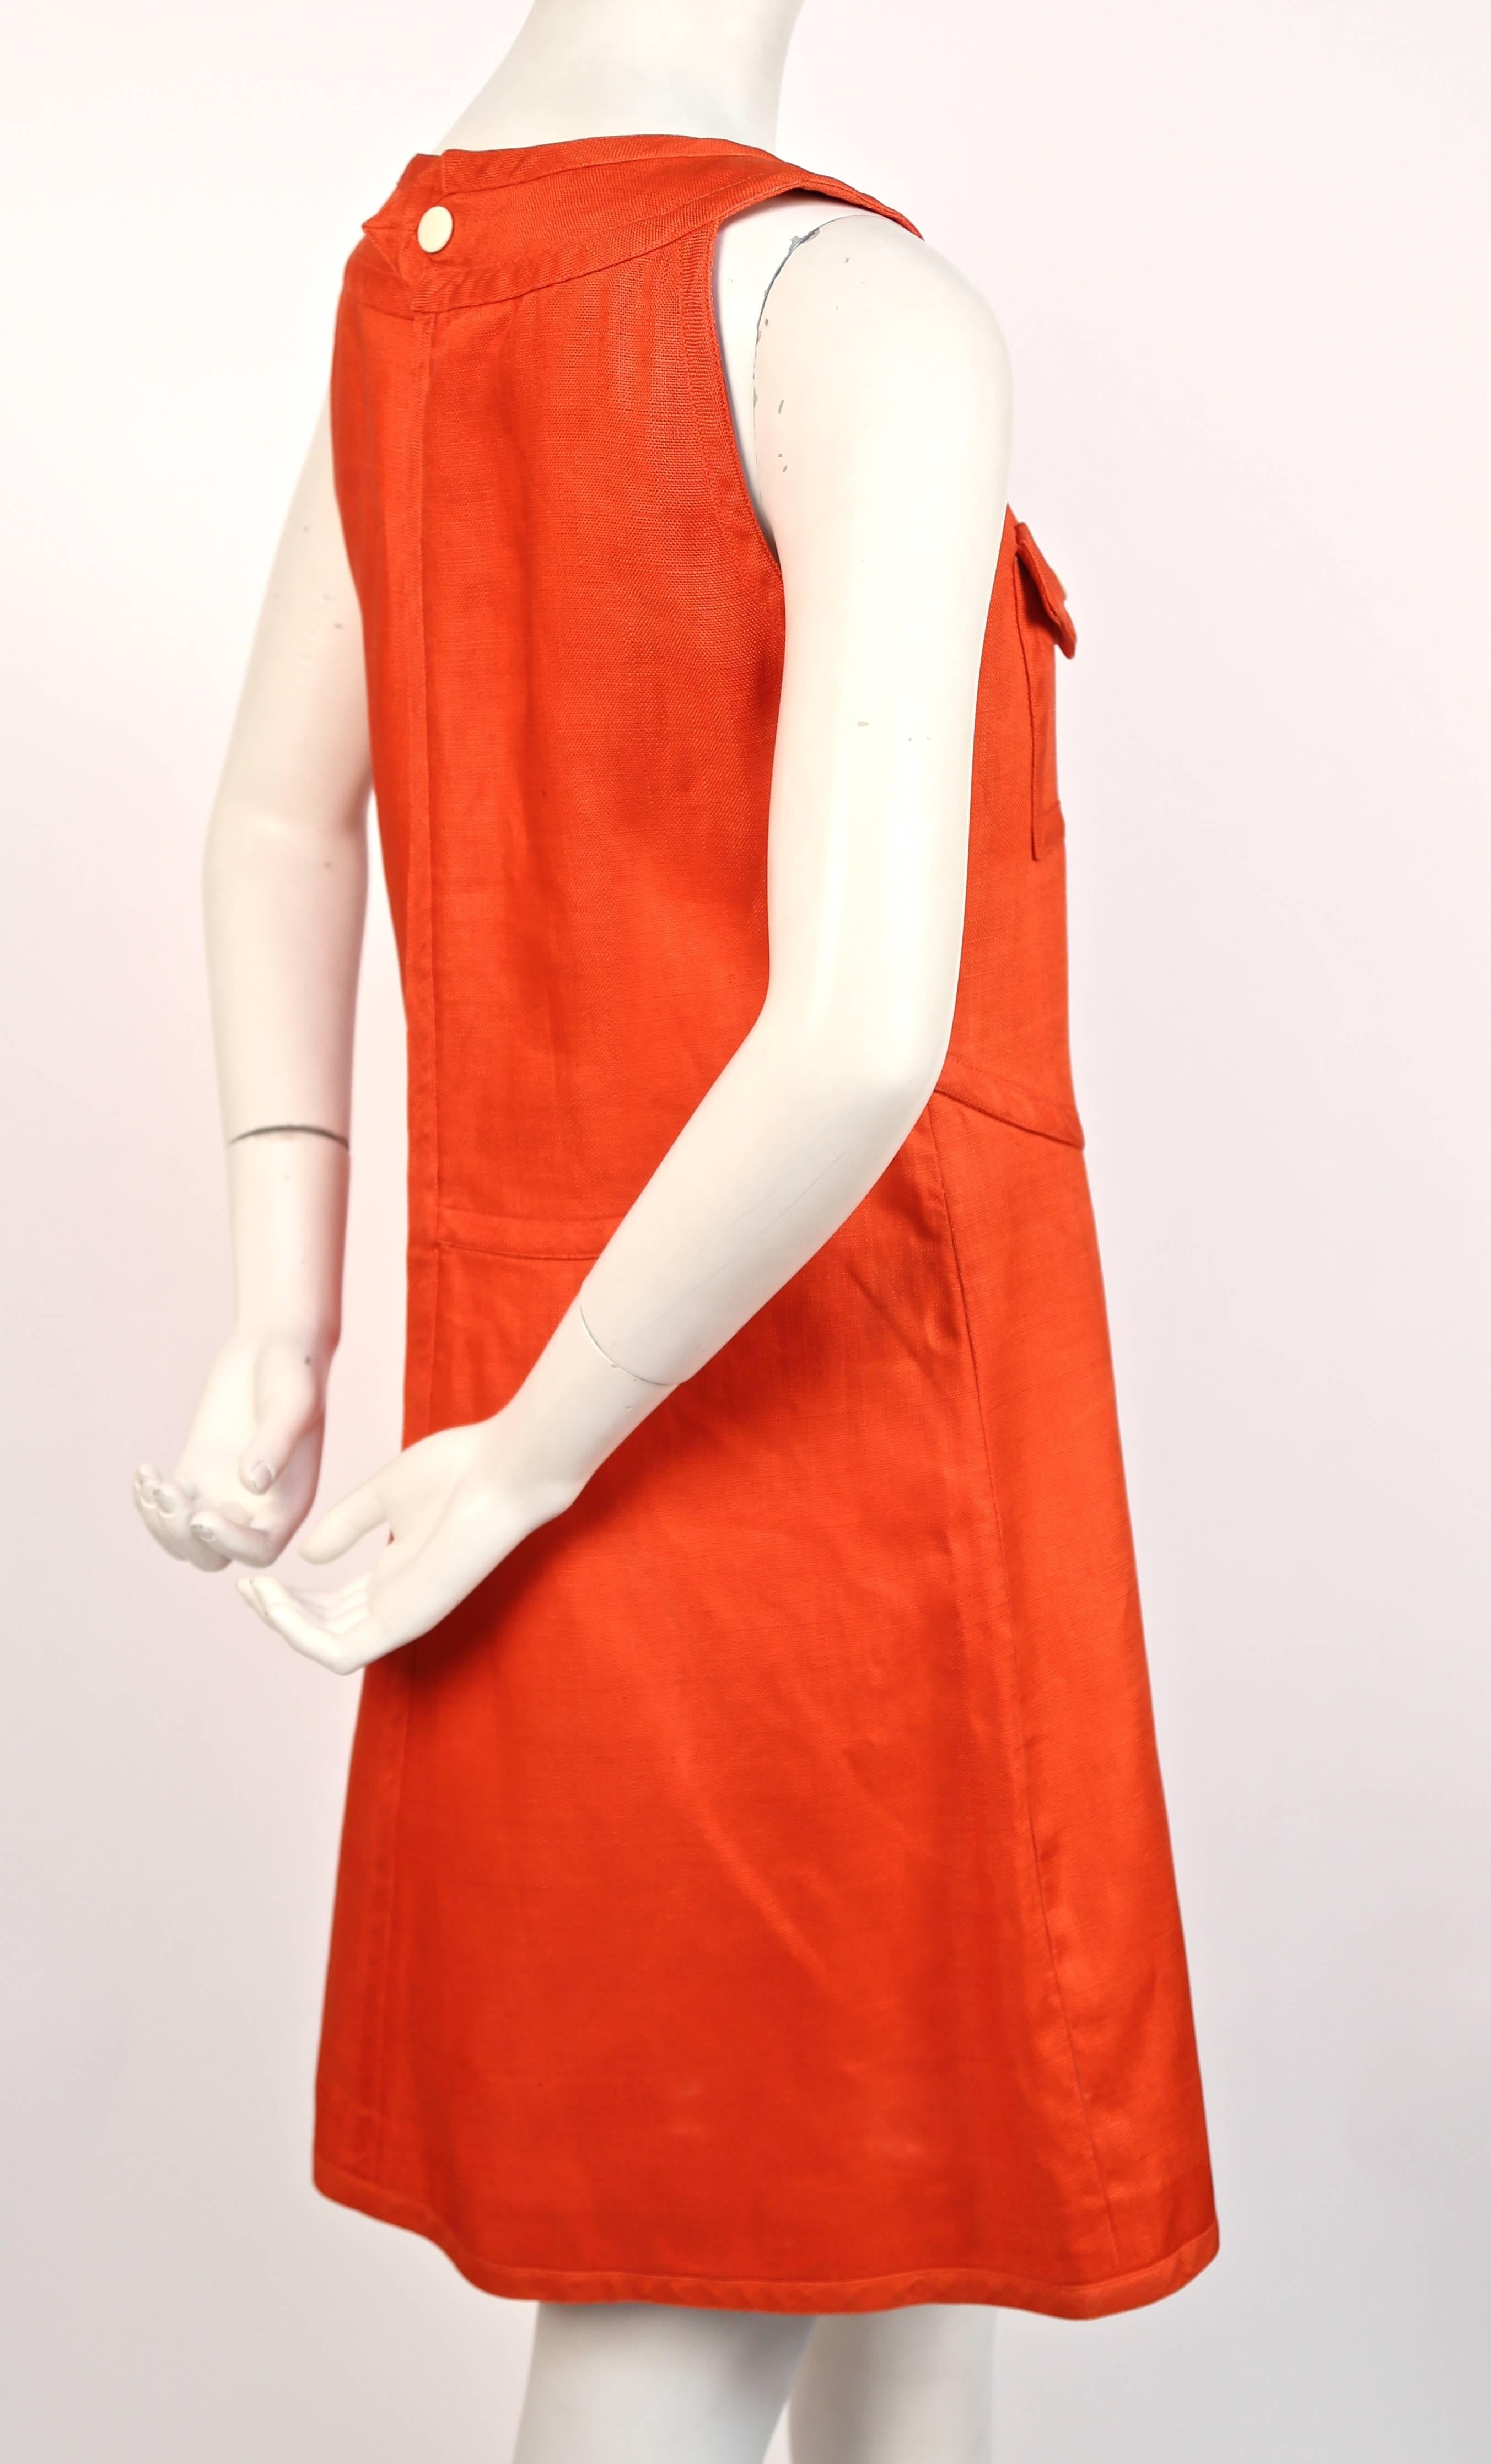 Red very rare 1960's COURREGES tangerine linen haute couture dress